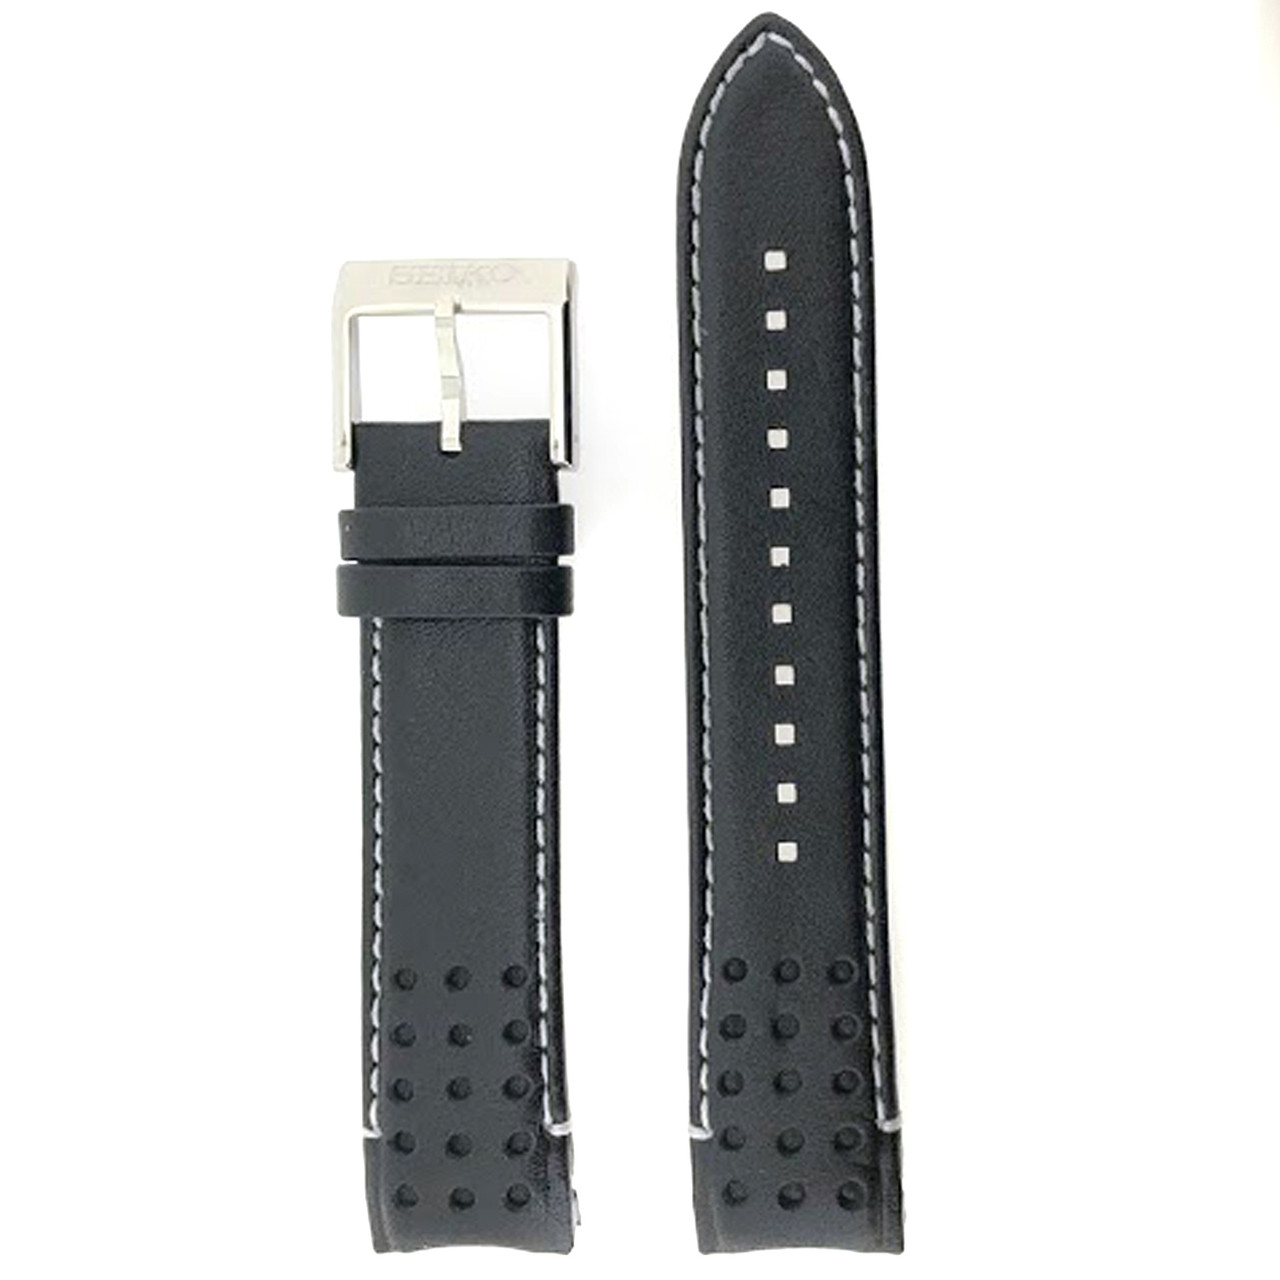 Seiko Original Leather Strap Watch Bands watchMateiral